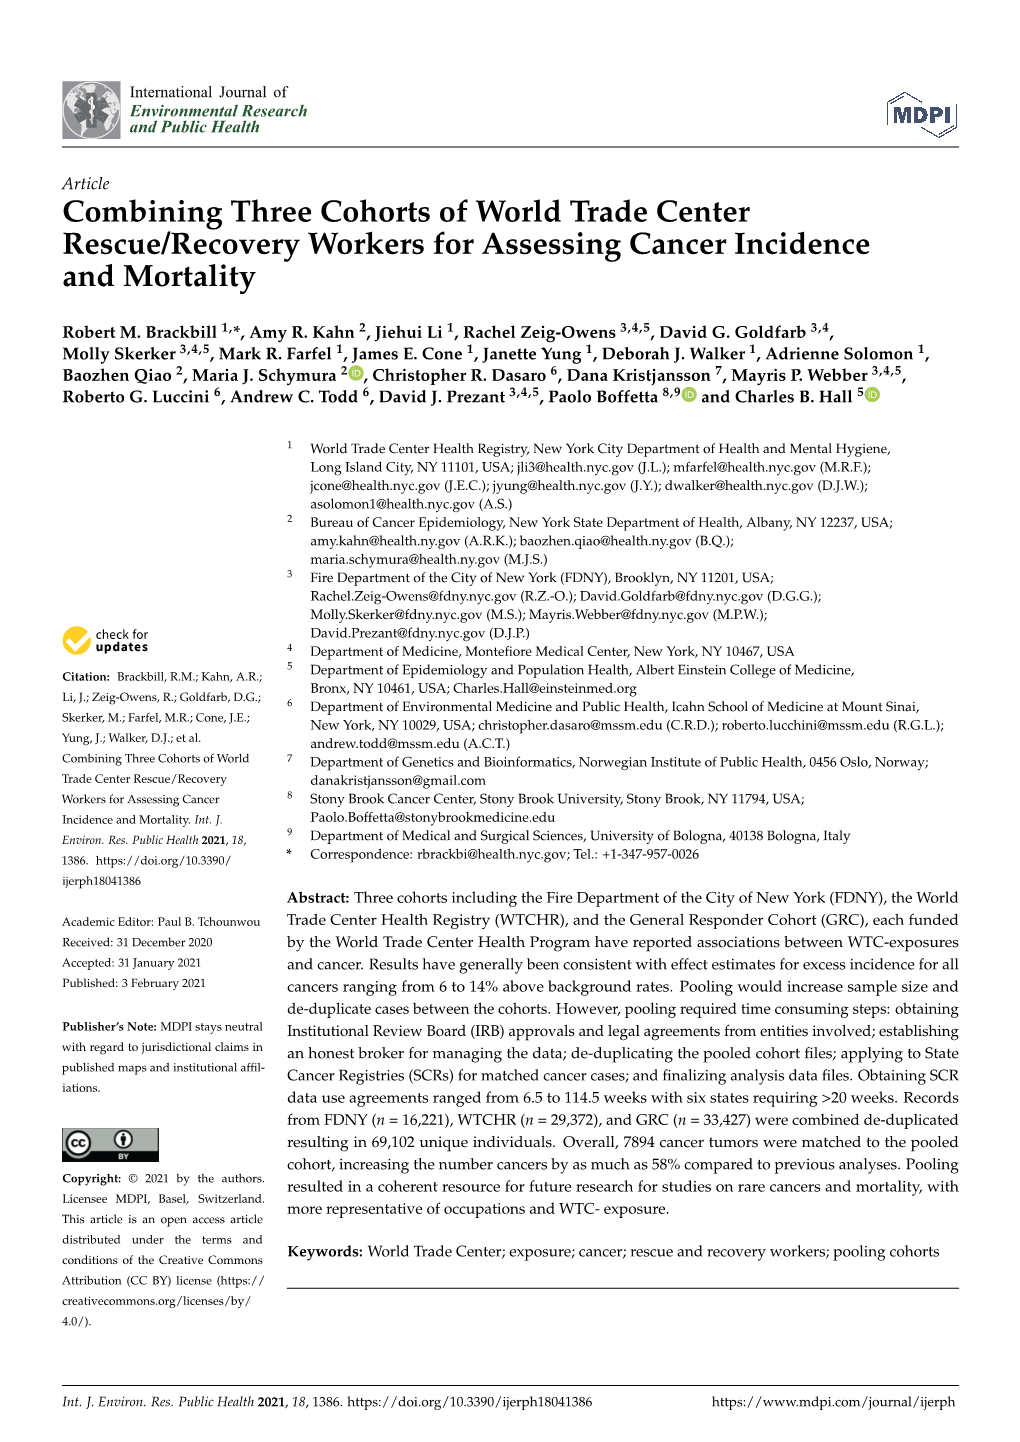 Combining Three Cohorts of World Trade Center Rescue/Recovery Workers for Assessing Cancer Incidence and Mortality